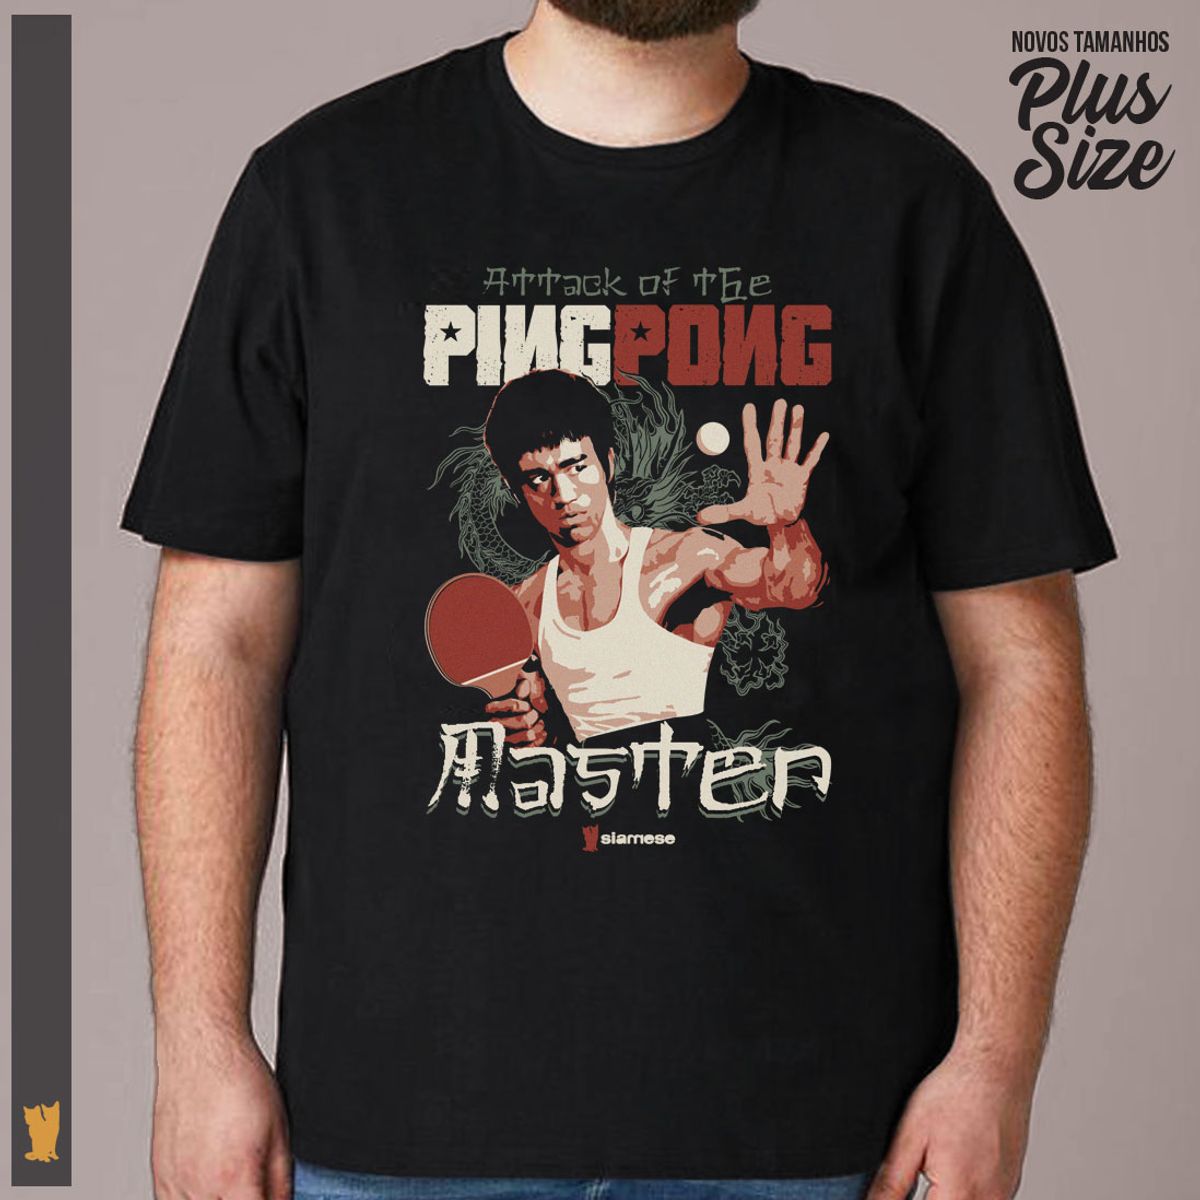 Nome do produto: SIAMESE PLUS SIZE BRUCE LEE PING PONG MASTER